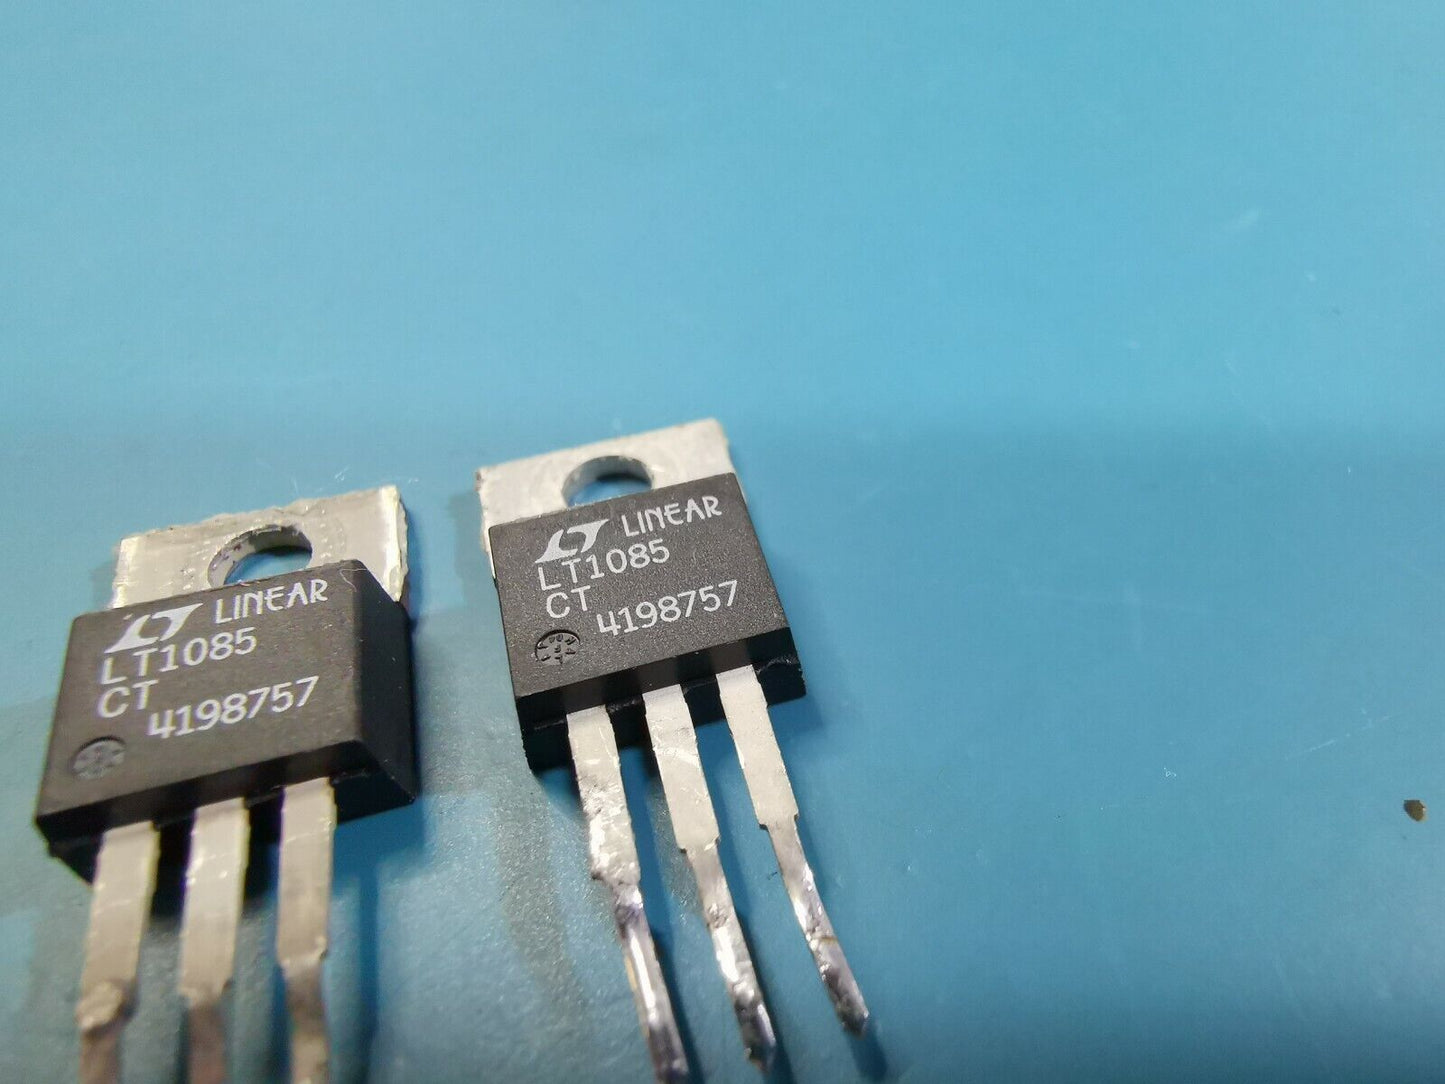 2pcs Genuine LT 1085CT 3A Linear Voltage Regulator From Military Equipment